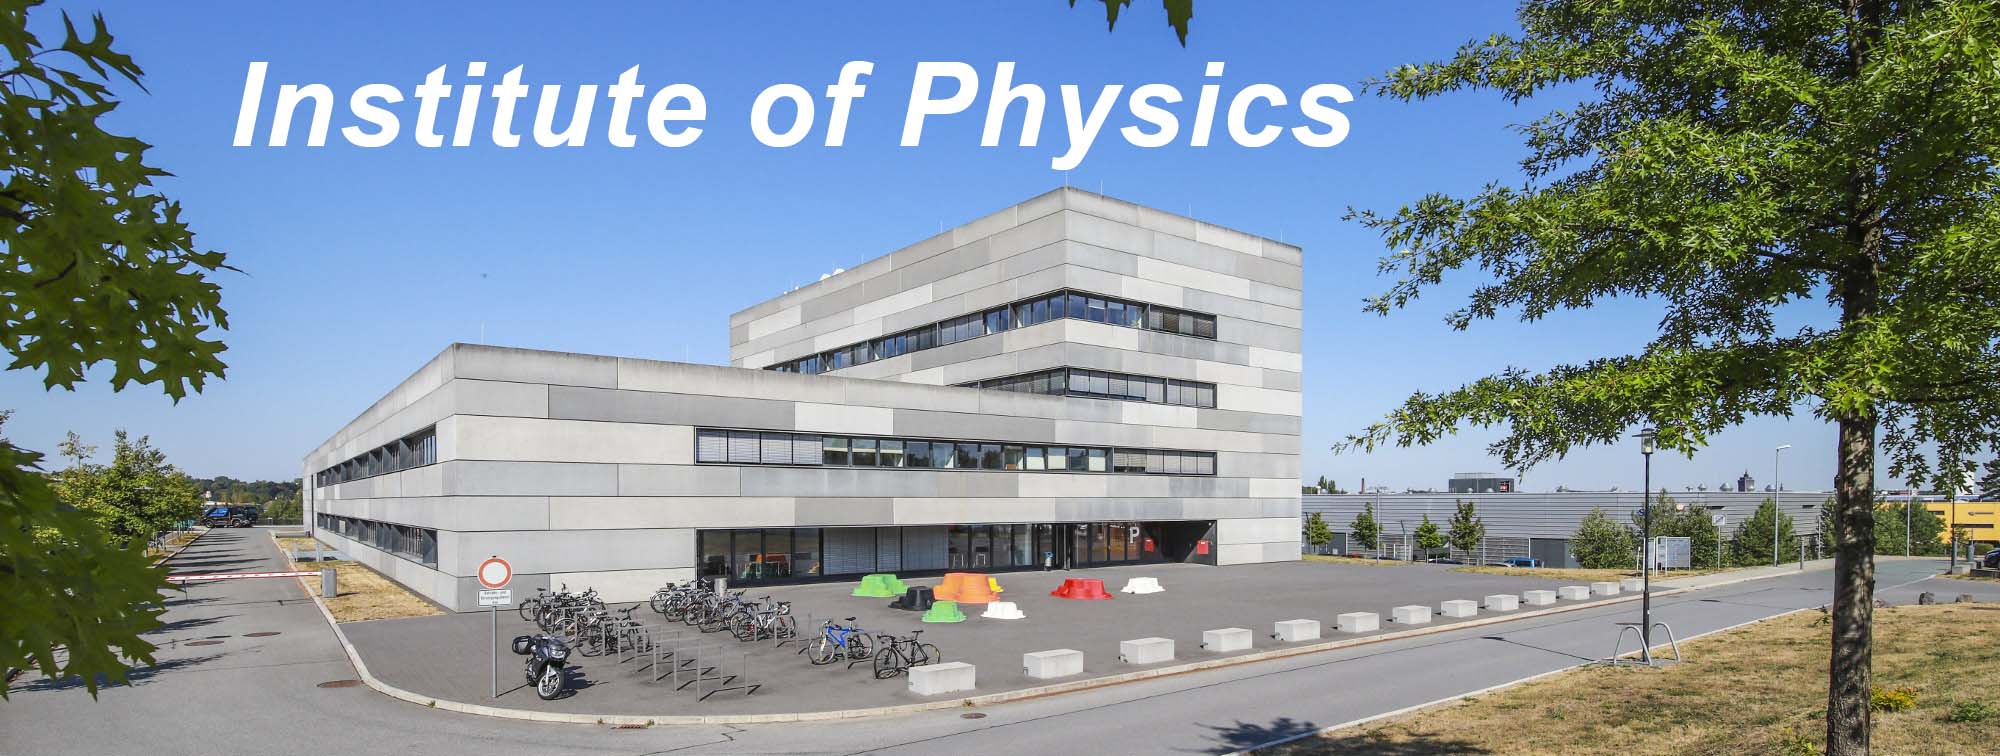 Insitute of Physics - building